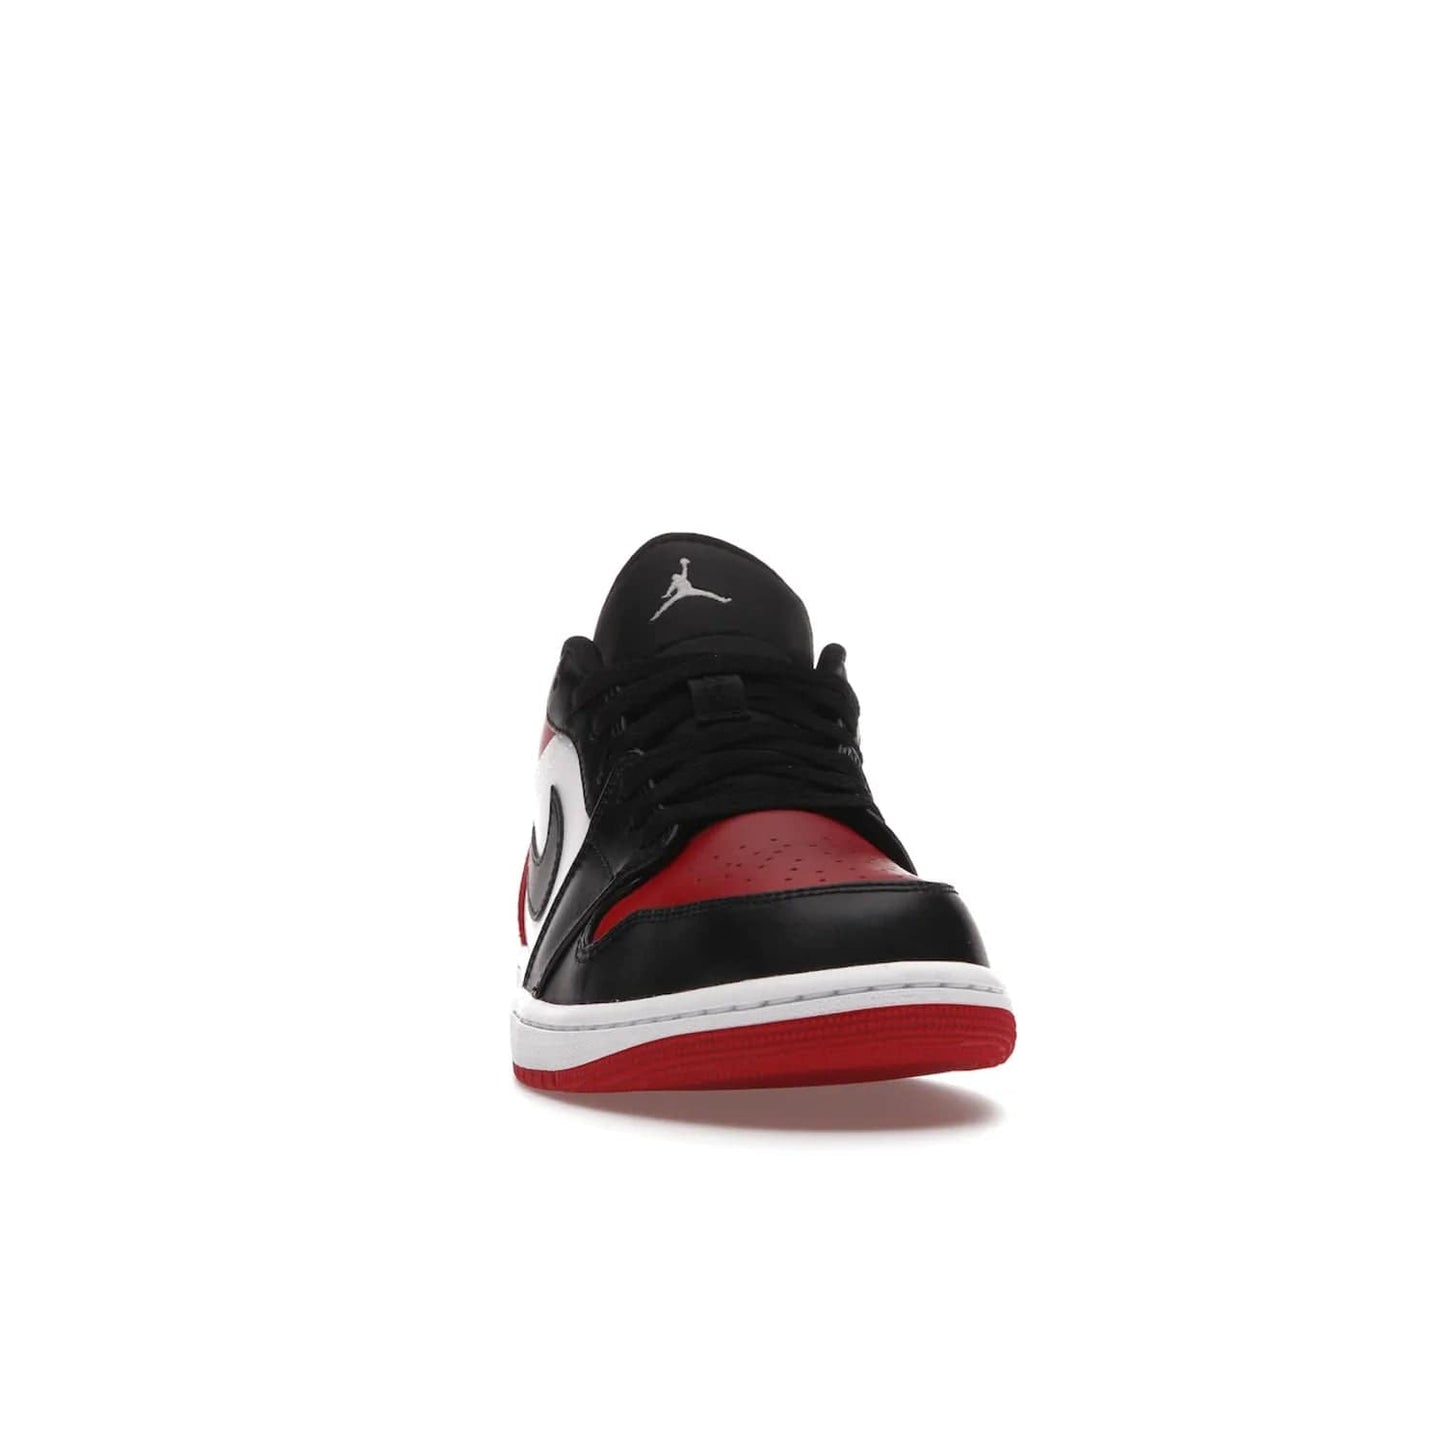 Jordan 1 Low Bred Toe - Image 9 - Only at www.BallersClubKickz.com - Step into the iconic Jordan 1 Retro. Mixing and matching of leather in red, black, and white makes for a unique colorway. Finished off with a Wing logo embroidery & Jumpman label. Comfortable and stylish at an affordable $100, the Jordan 1 Low Bred Toe is perfect for any true sneaker fan.